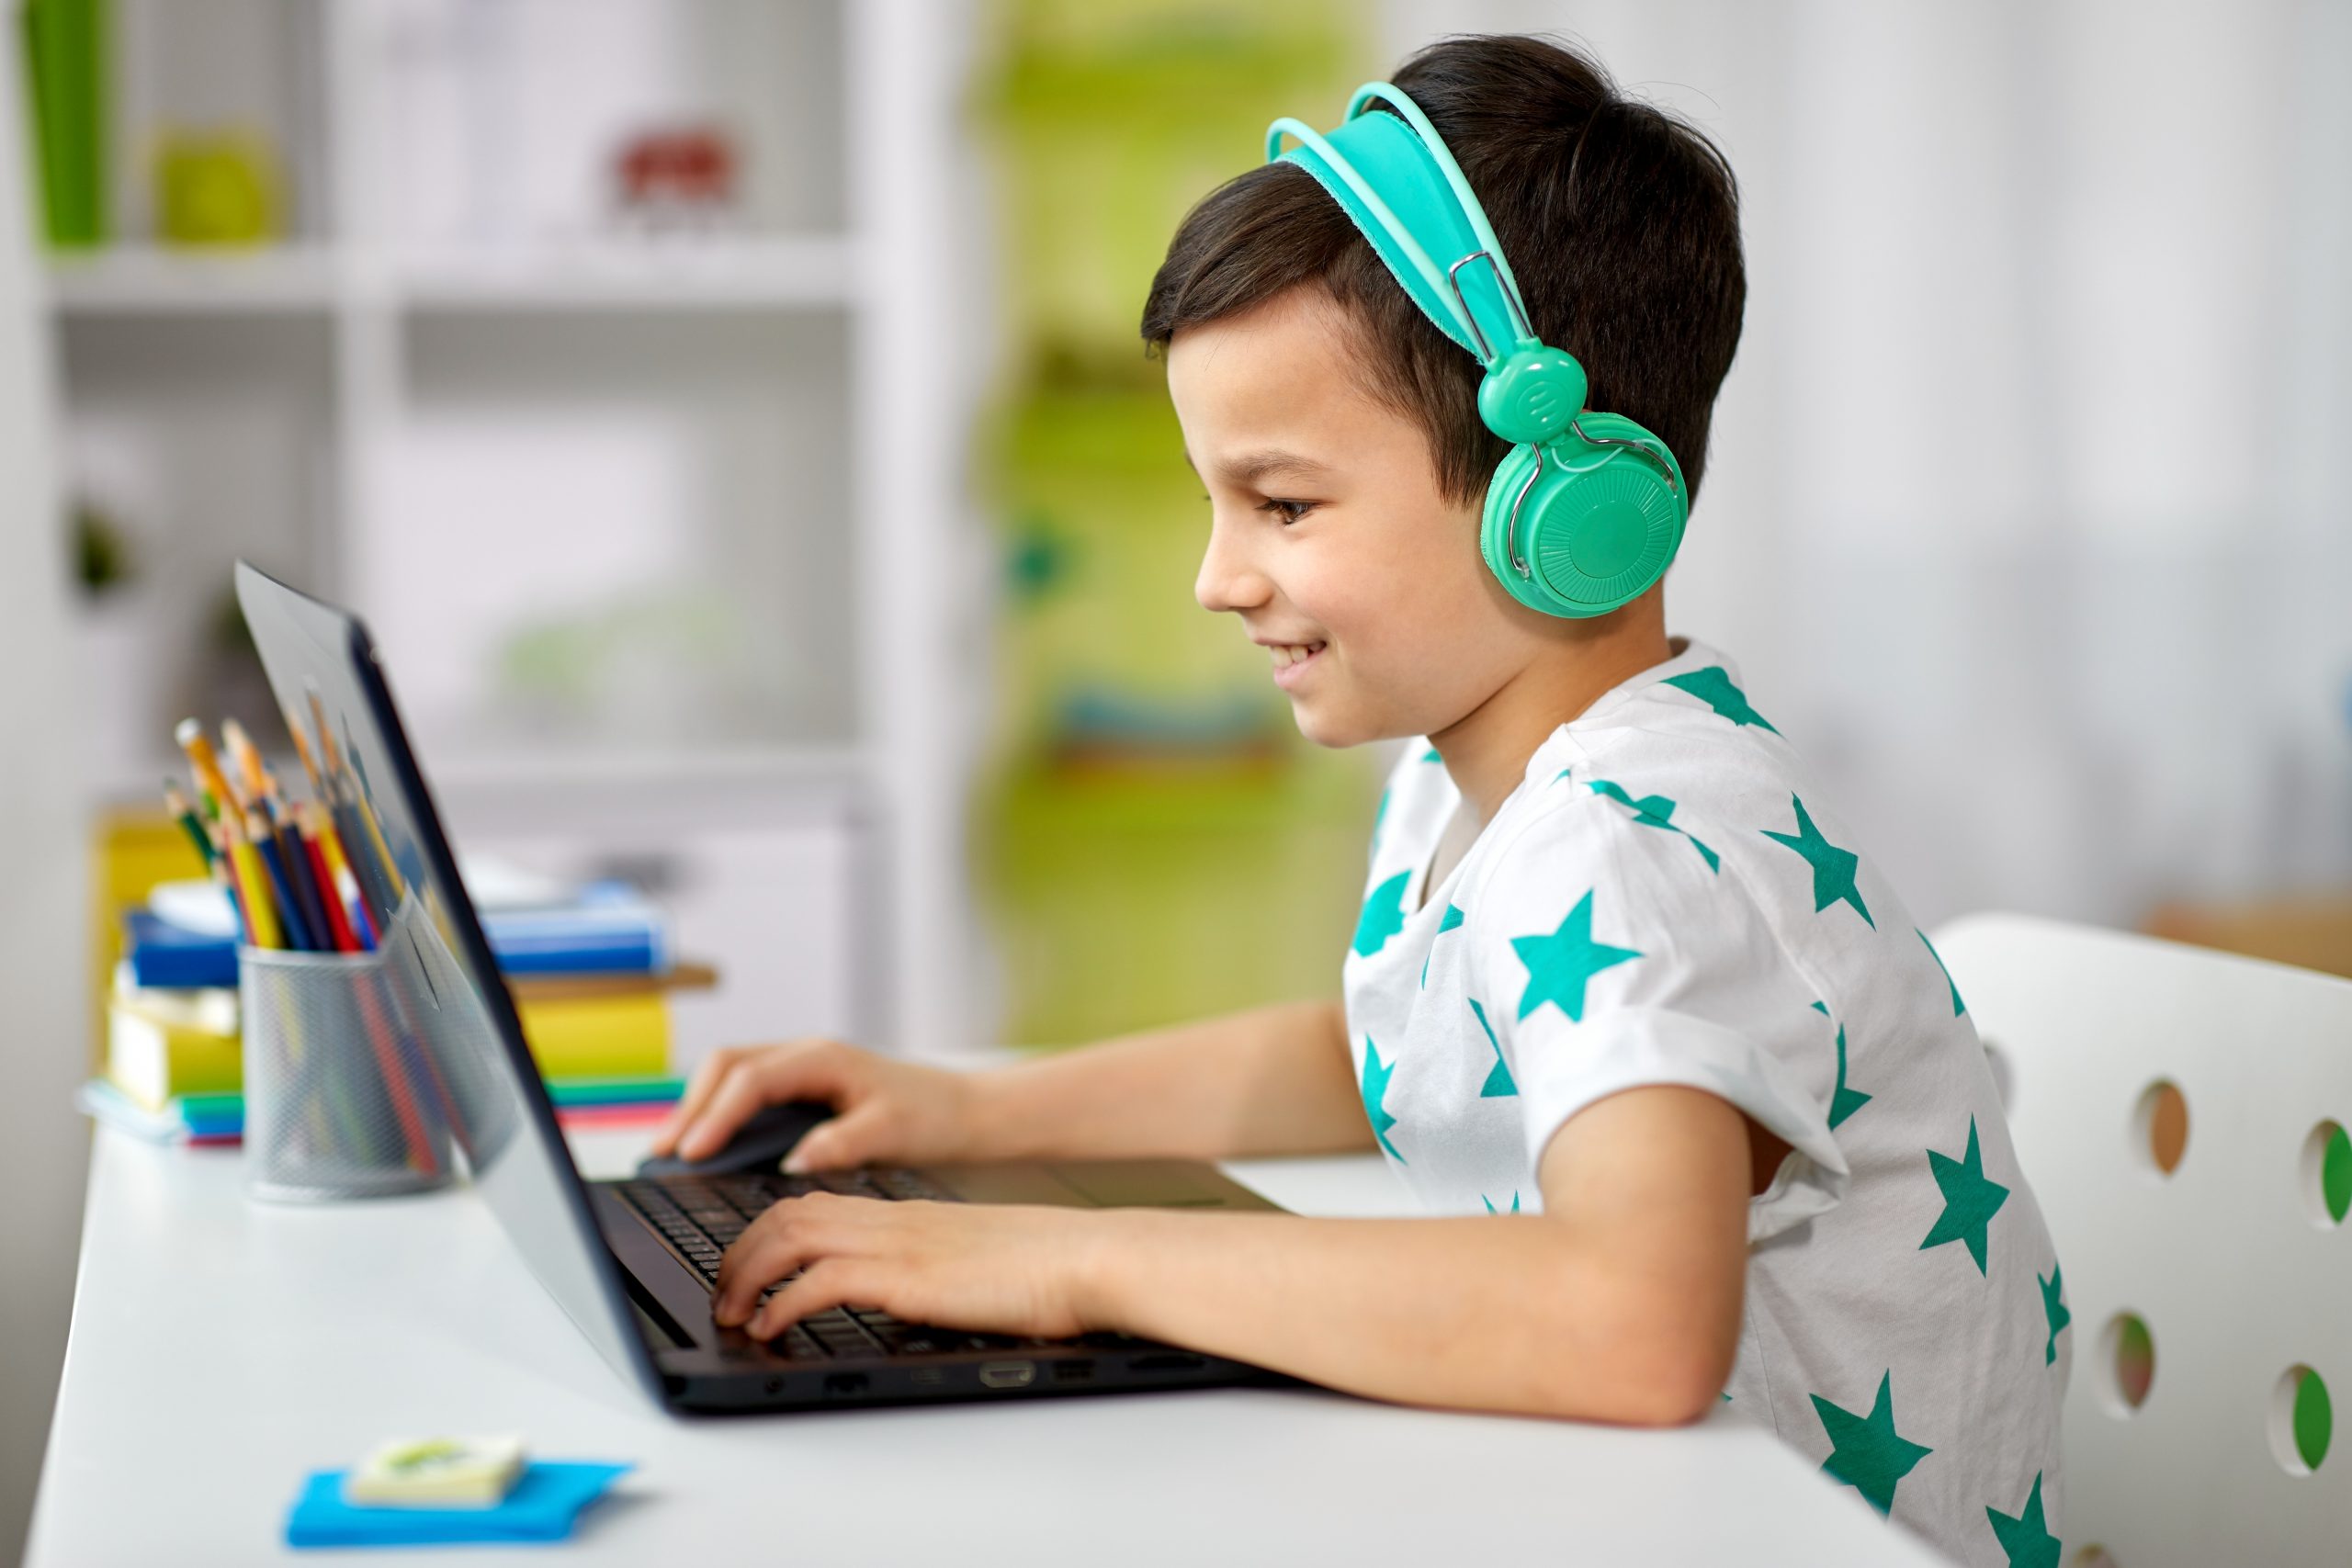 Young student smiling wearing headphones working on his Nicole the Math Lady Saxon Math homeschool lessons online on laptop.